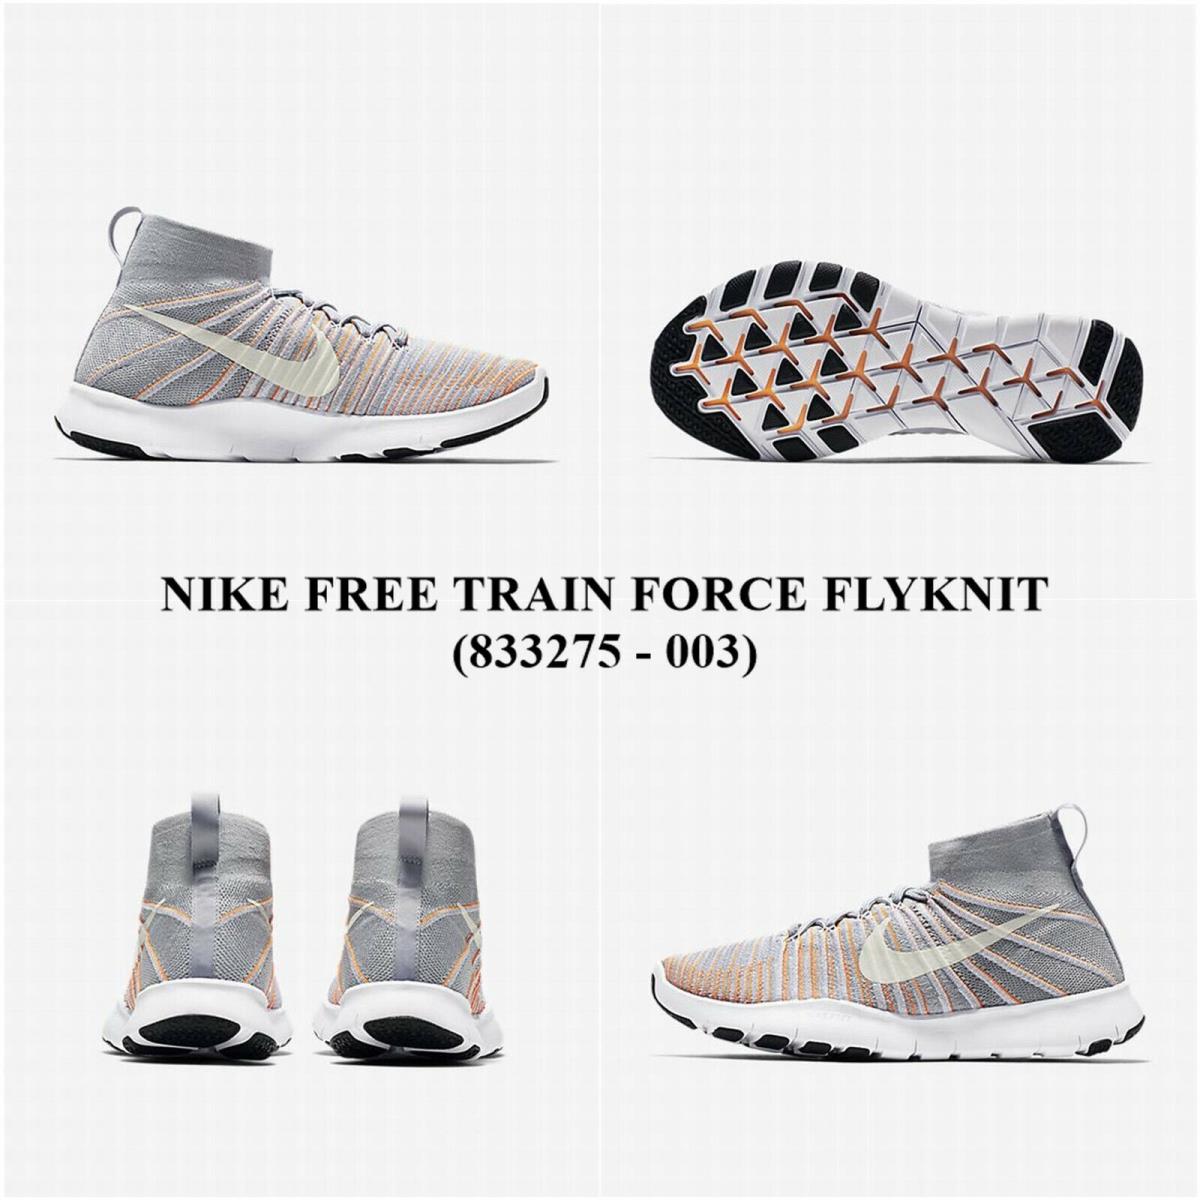 Nike Men`s Free Train Force Flyknit <833275 - 003> Trainning Shoes with Box